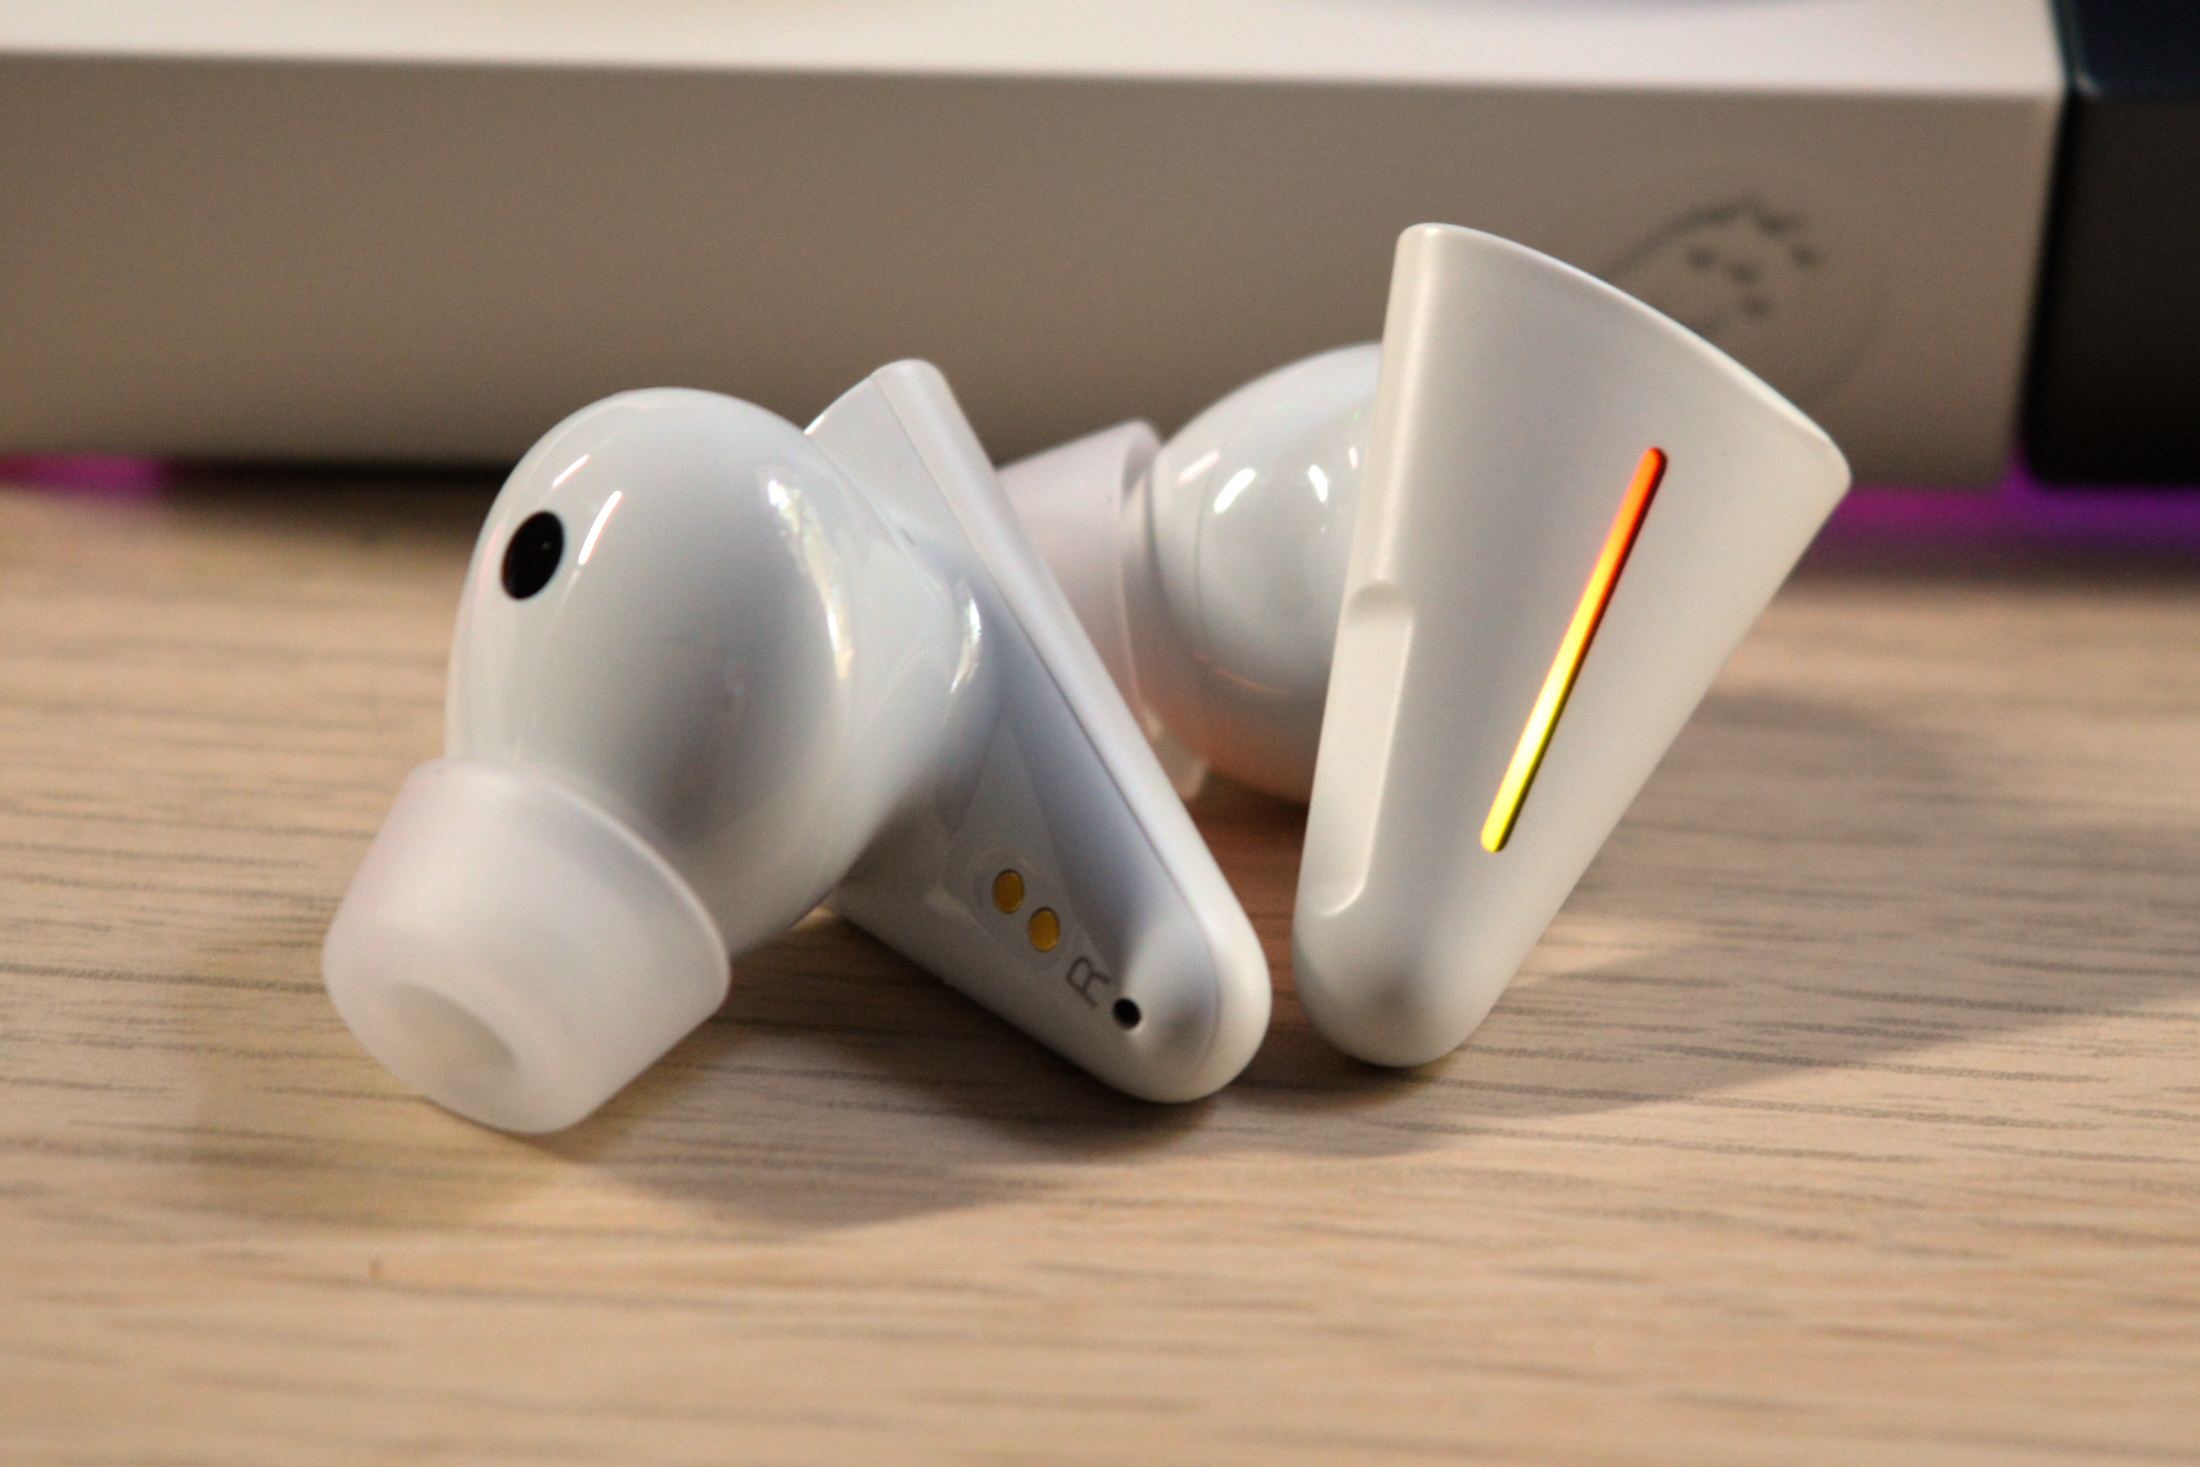 Angry Miao CYBERBLADE: The Best Earbuds to Replace Over-Ears by